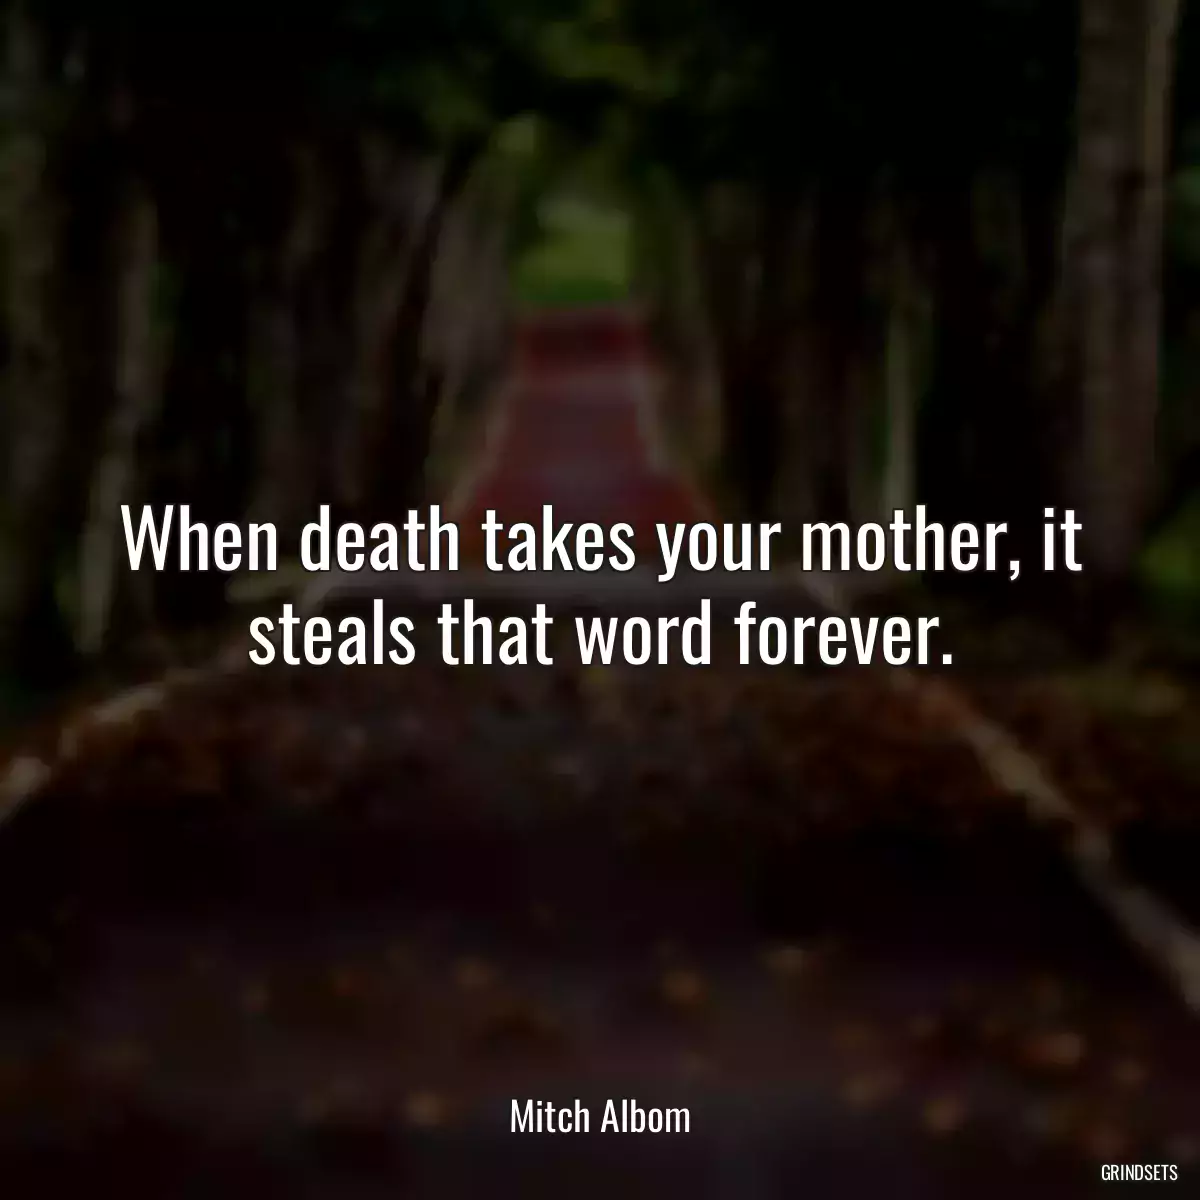 When death takes your mother, it steals that word forever.